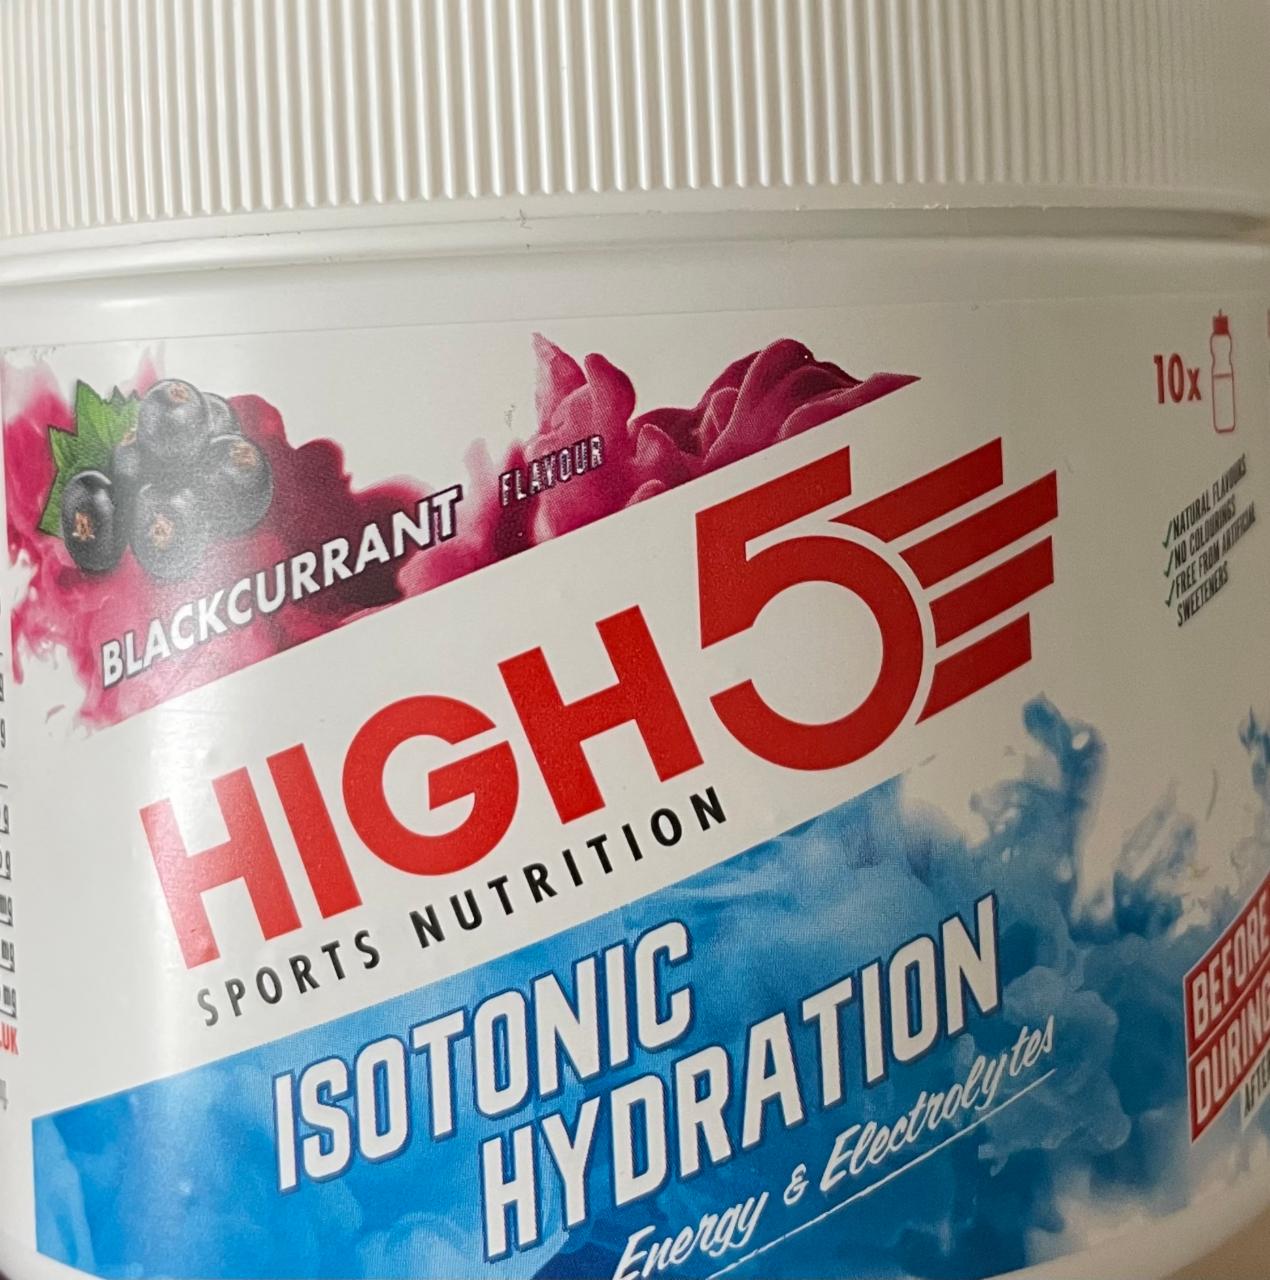 Fotografie - Blackcurrant Isotonic Hydration High5